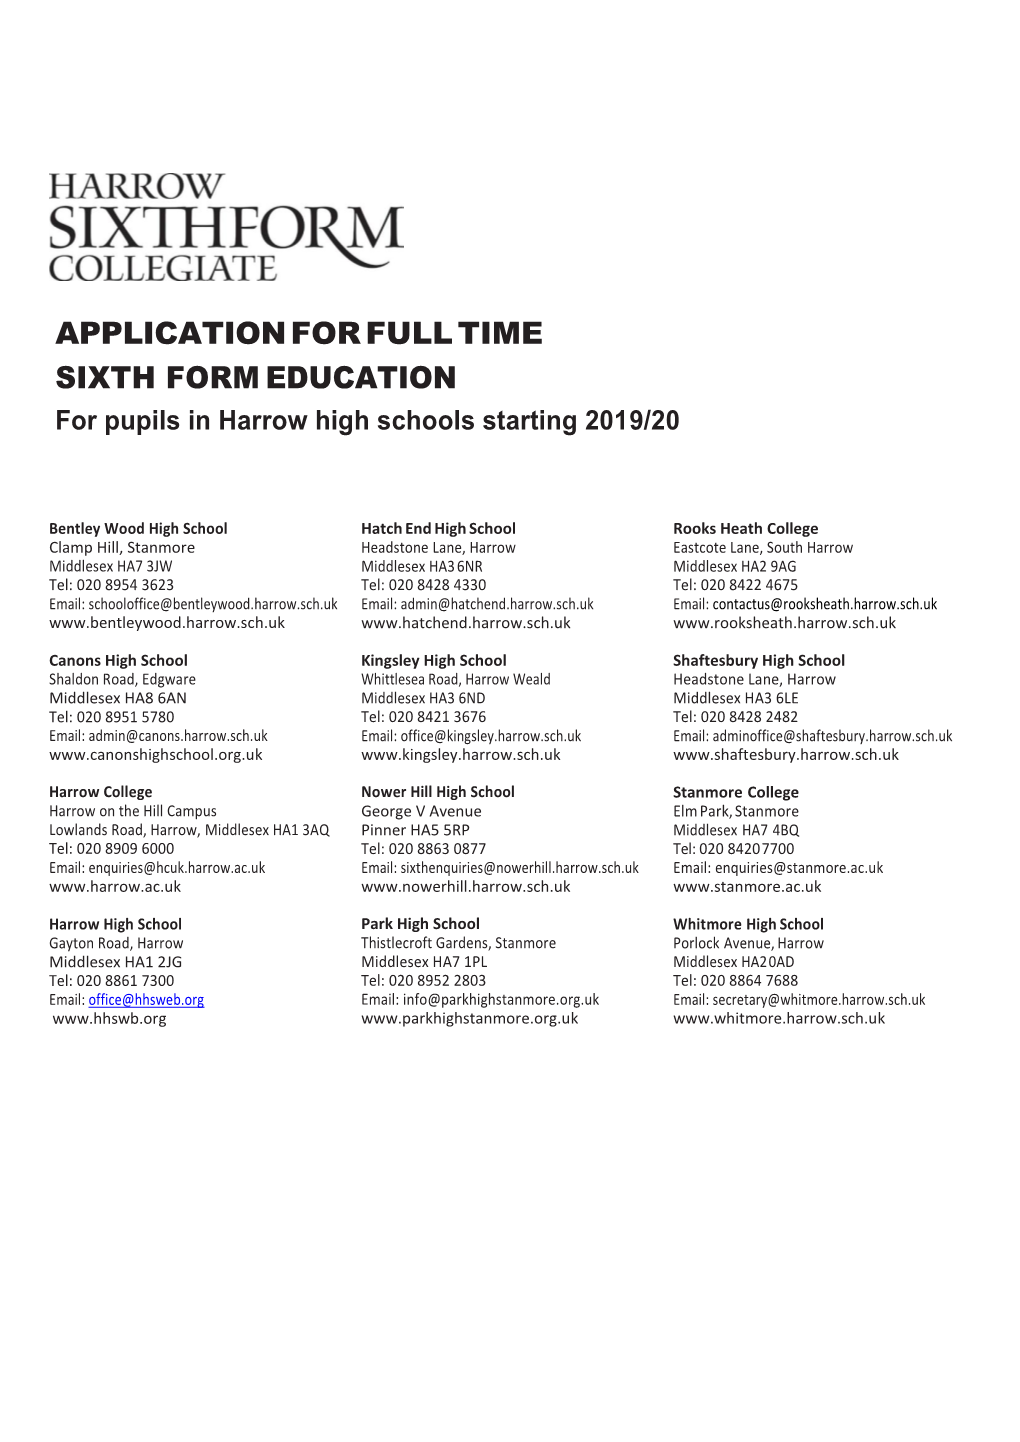 APPLICATION for FULL TIME SIXTH FORM EDUCATION for Pupils in Harrow High Schools Starting 2019/20